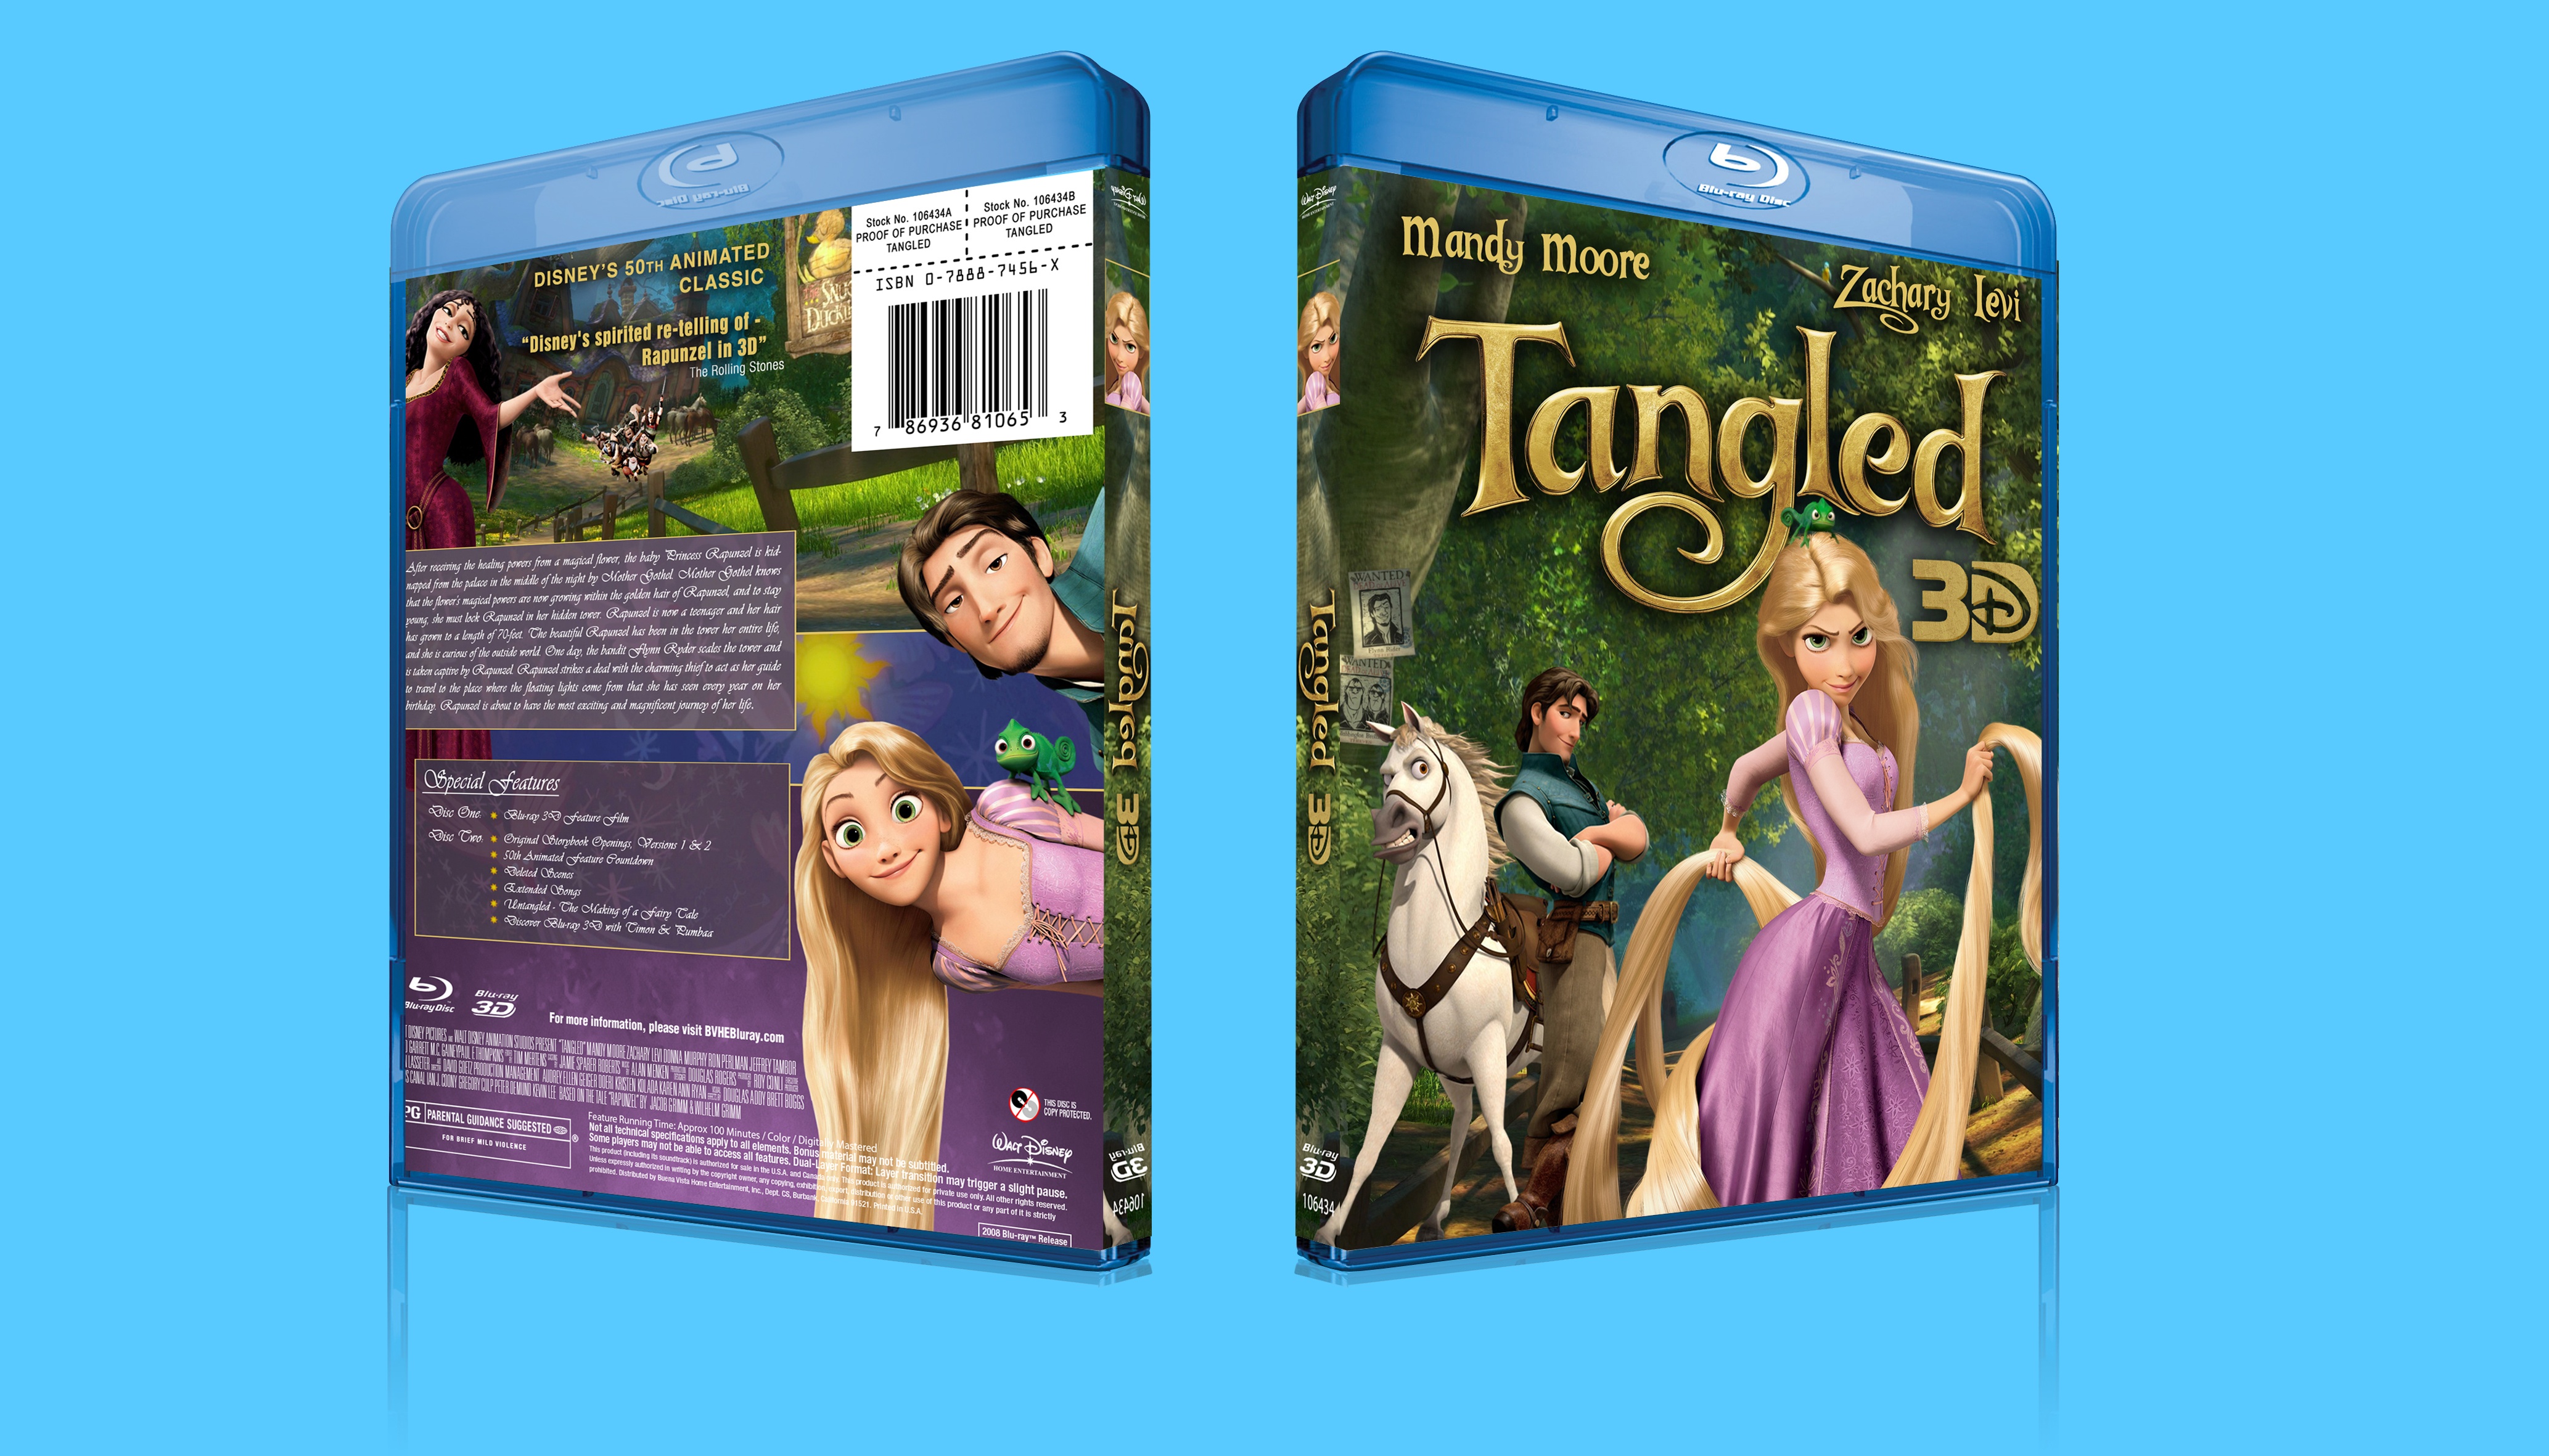 Tangled 3D box cover